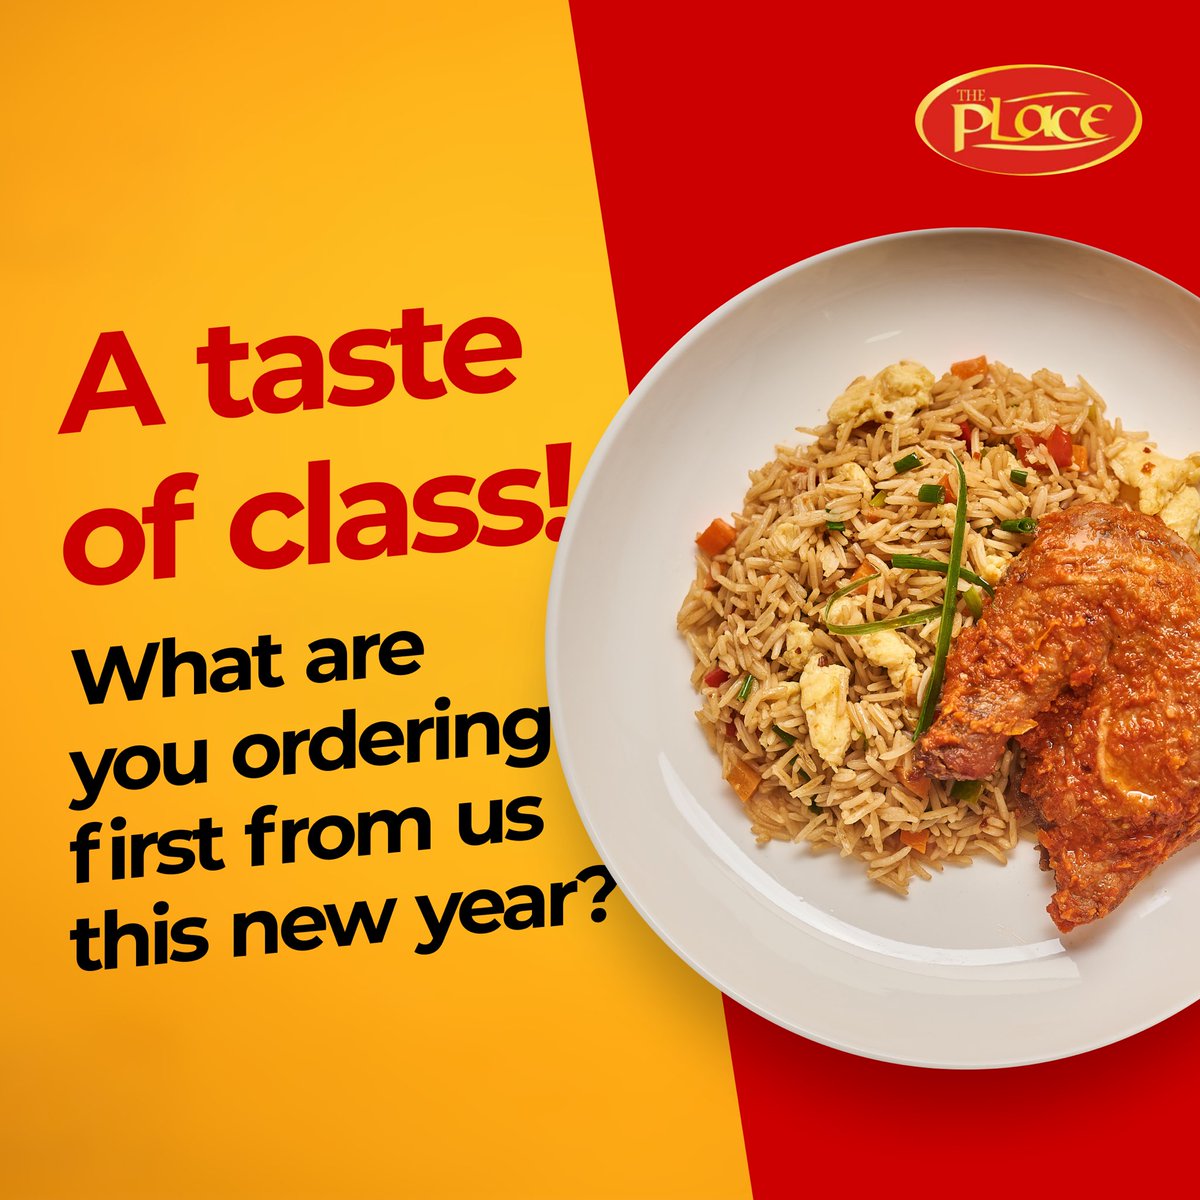 Elevate your dining experience with a touch of class! 

What will you be ordering first from us in the new year? 

#ATasteOfClass
#FoodExploration #UnexpectedFlavors #ShareYourBite
#ThePLacE #BreakfastDelights #FuelYourMorning #DeliciousStart #FlavorExplosion #NigerianFood